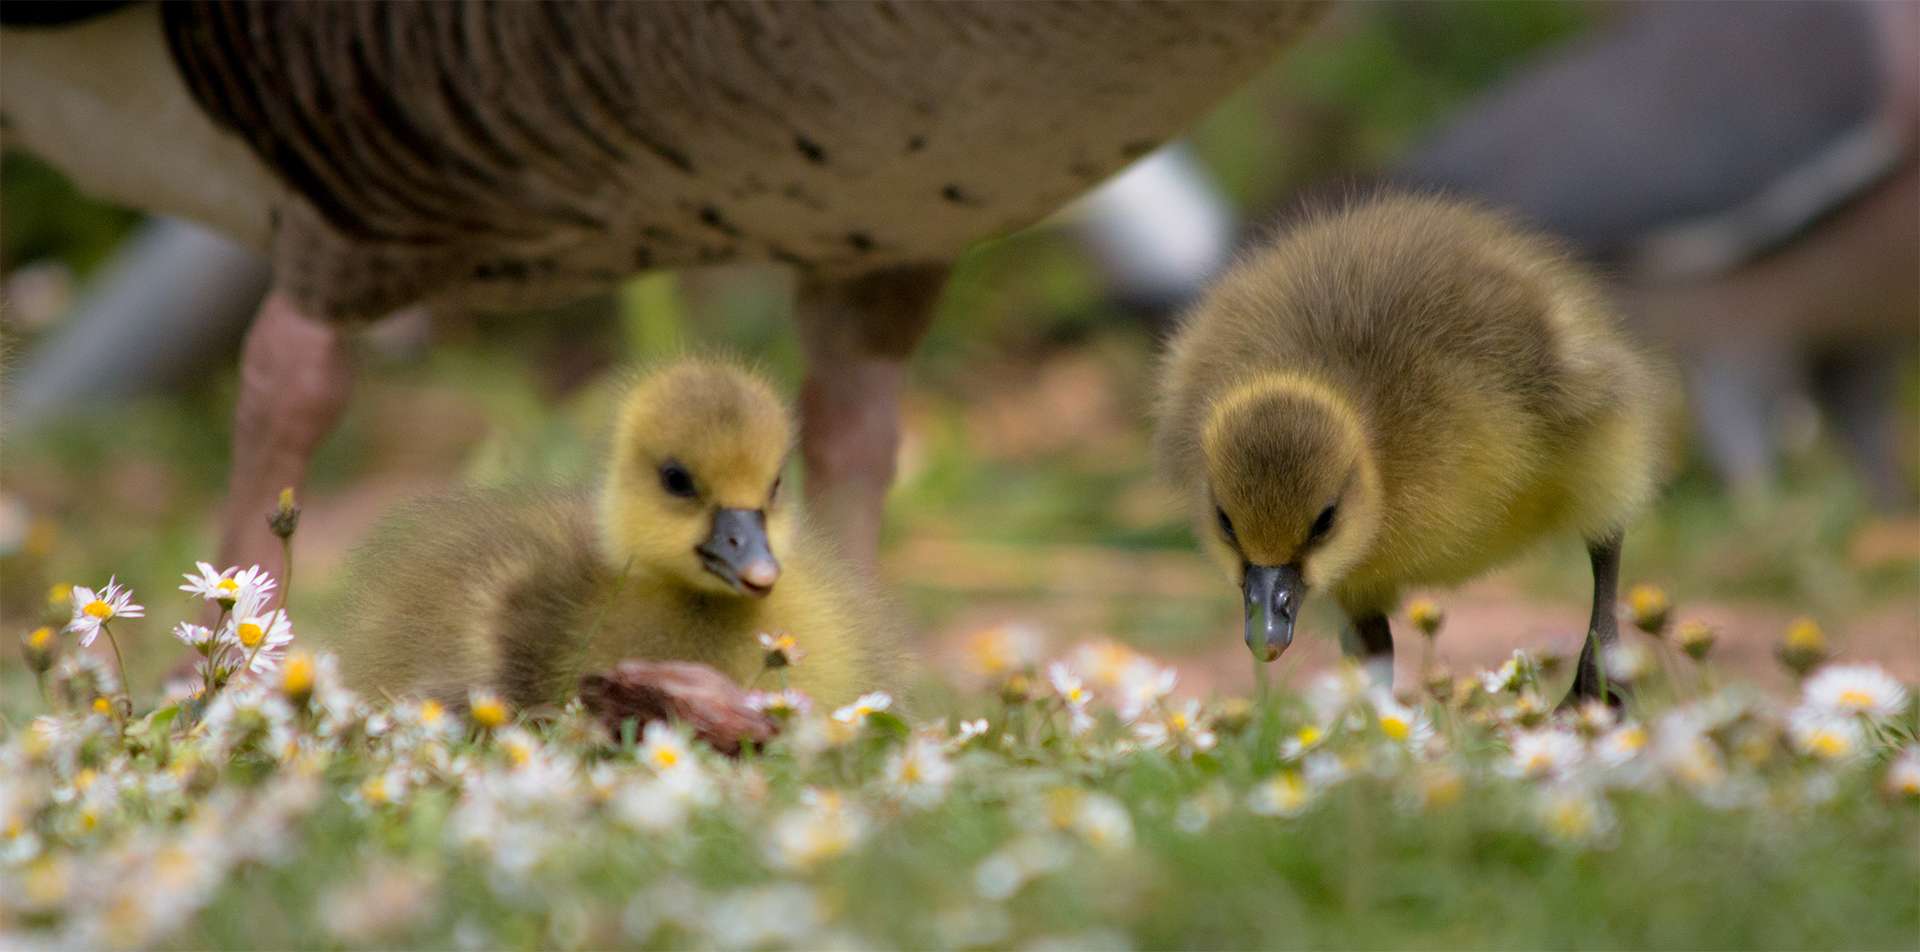 Baby Greylag goose goslings eating daisies in a meadow during spring at the wildfowl and wetlands trust visitor centre at Slimbridge, UK